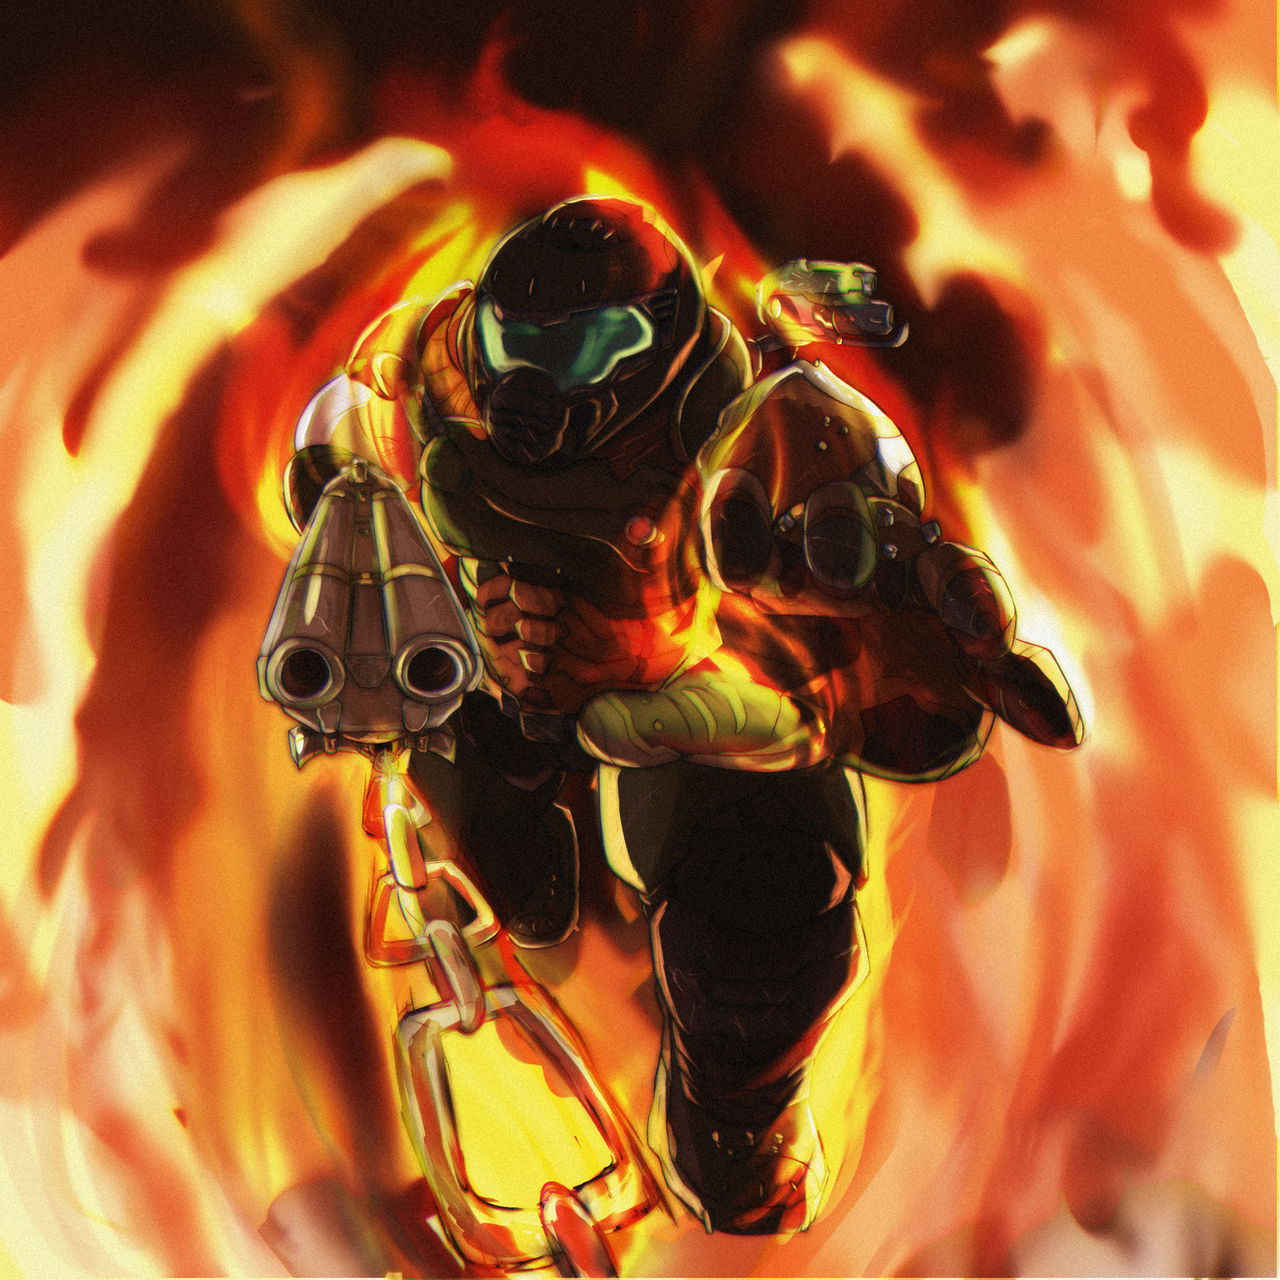 DOOMSLAYER ON FIRE by CyborgAfro on DeviantArt